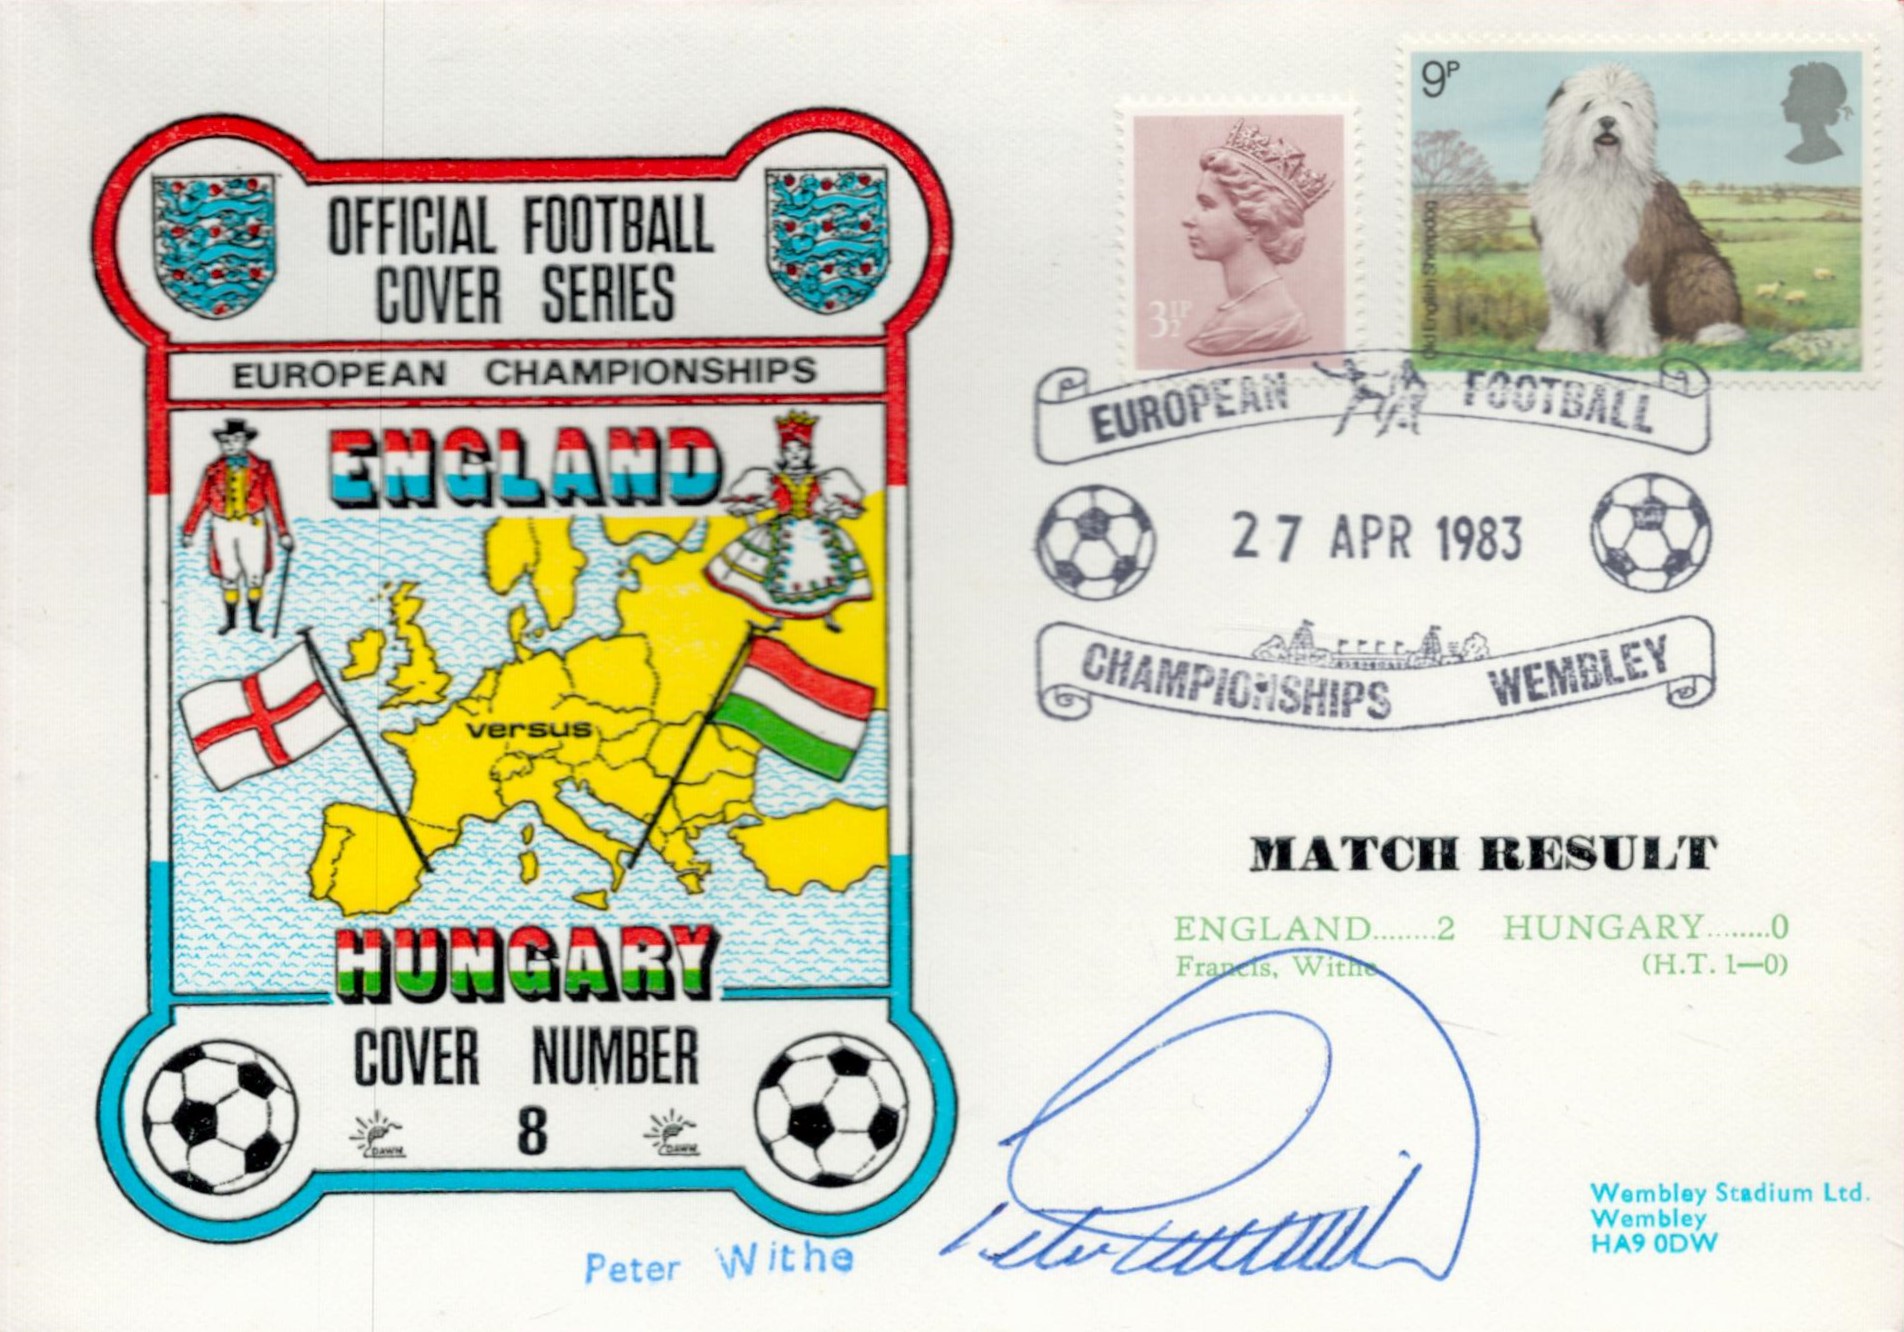 Peter With Signed England V Hungary Cover Series With 2 British Stamps and 27 Apr 1983 Postmark.